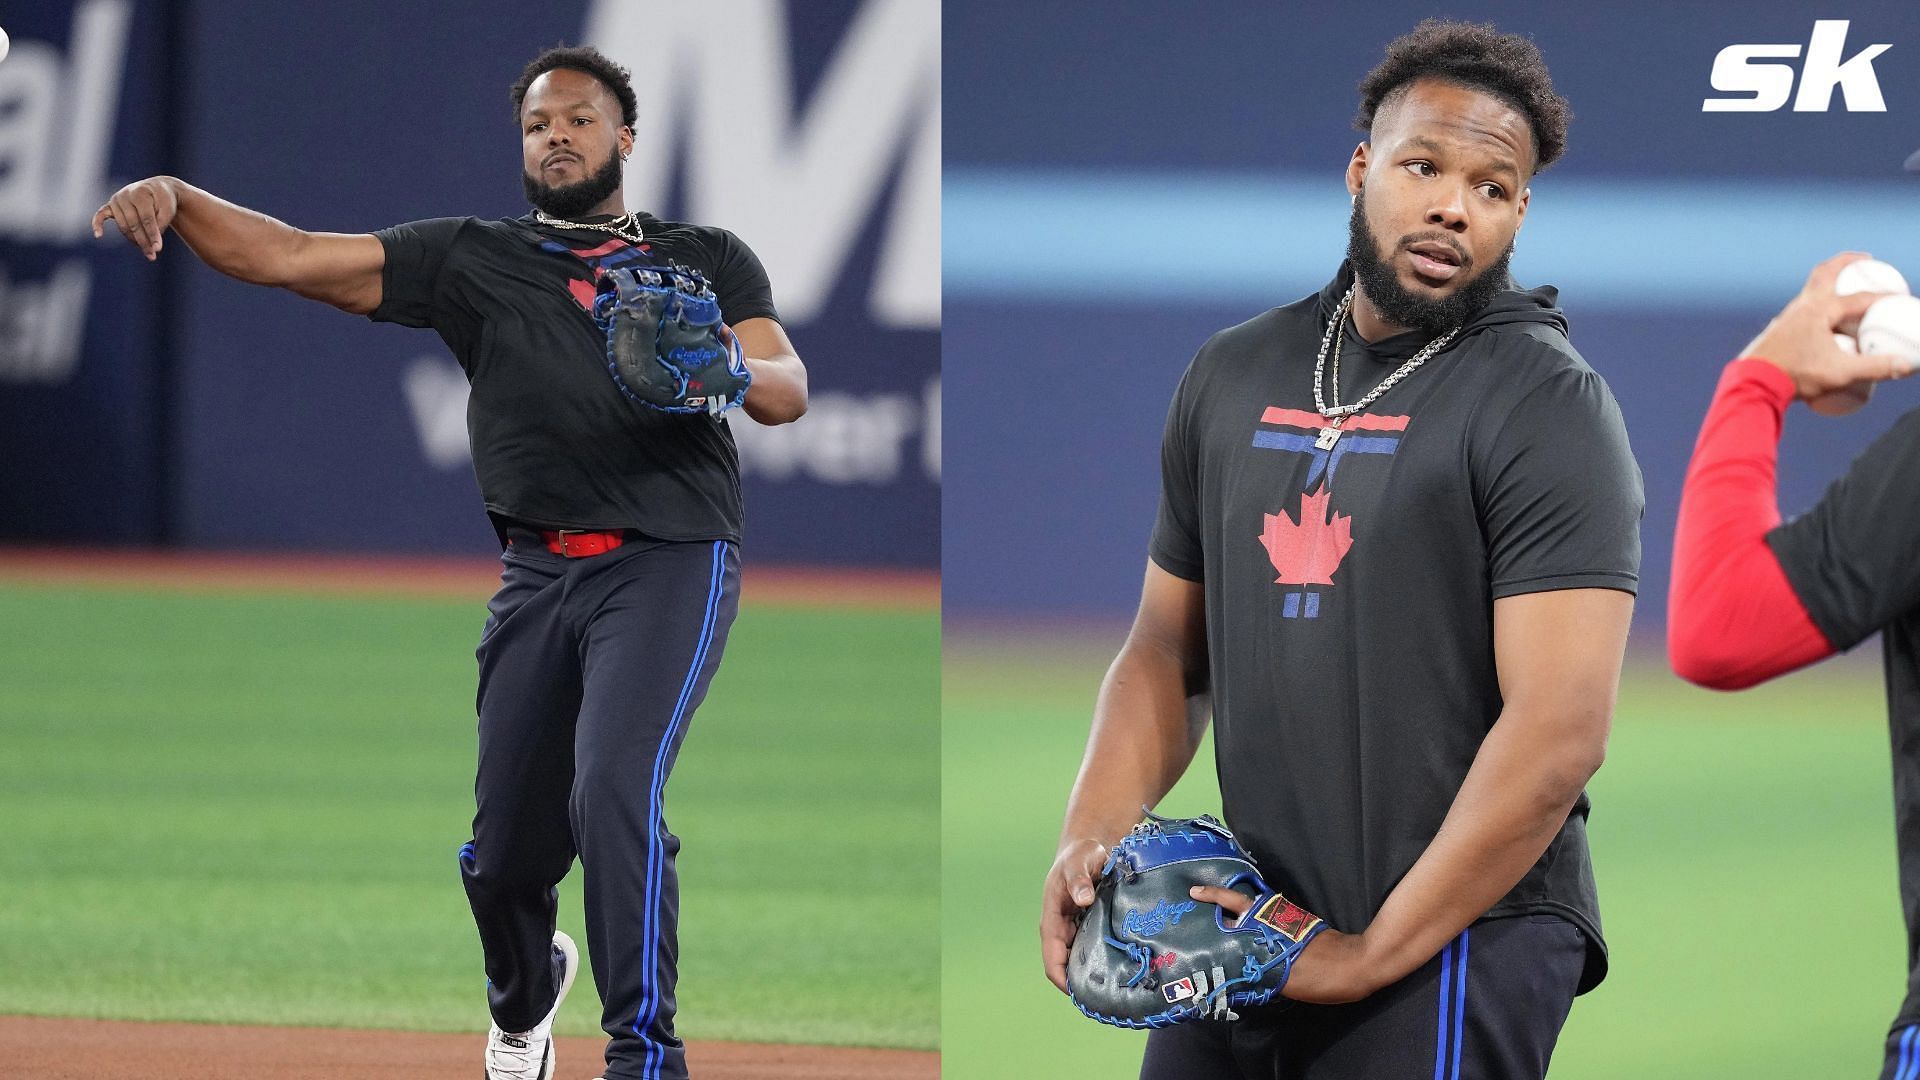 Vladimir Guerrero Jr. debuted a new haircut on Wednesday prior to matchup against Red Sox